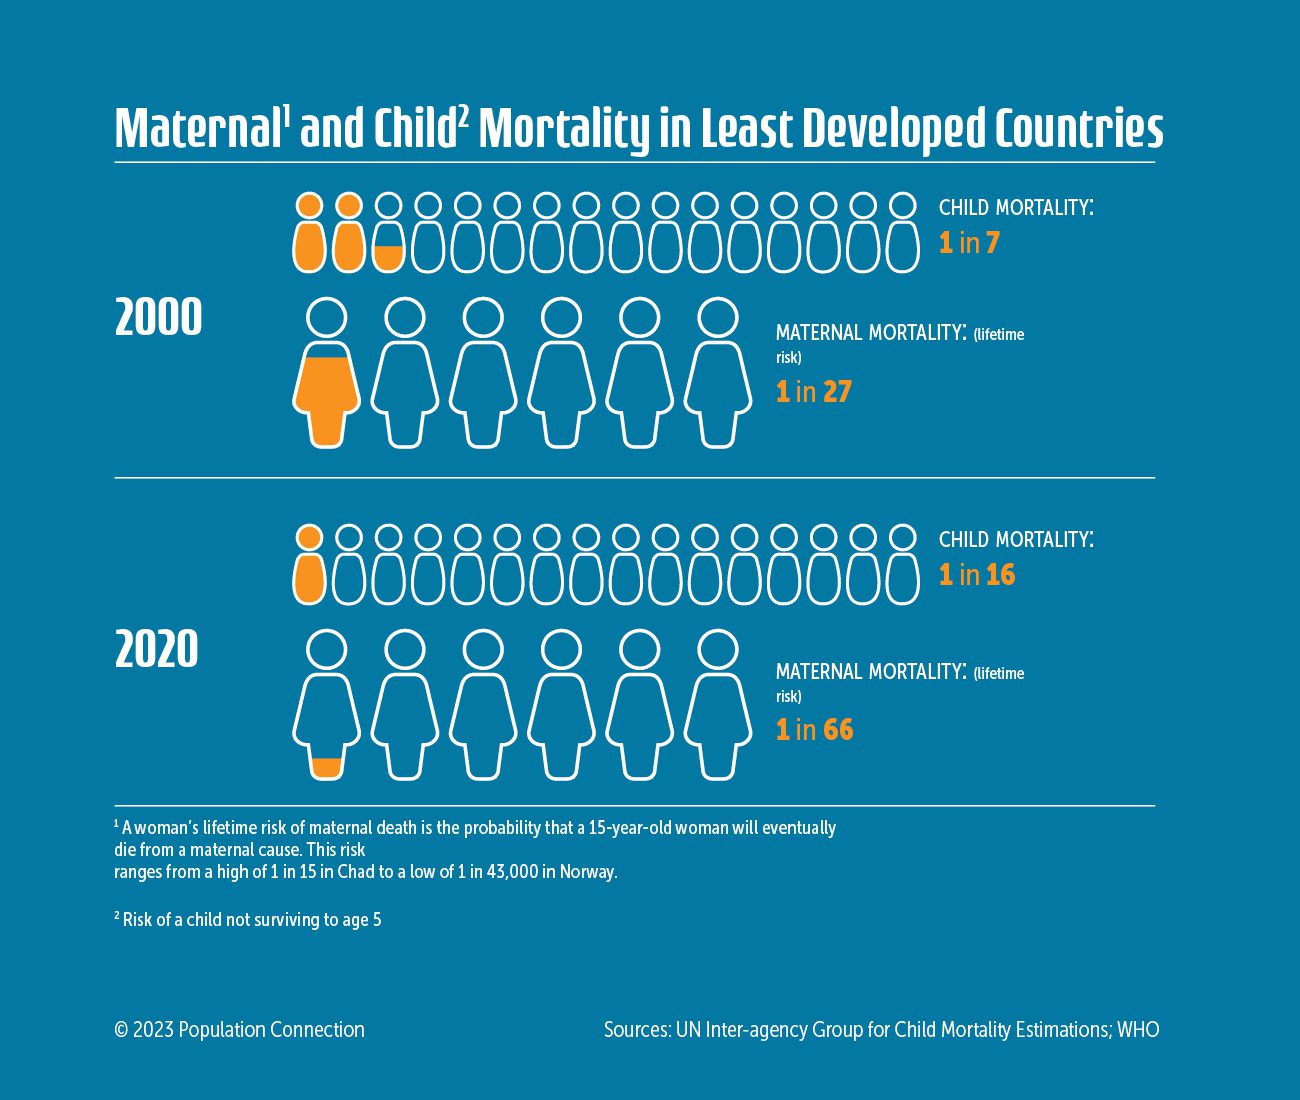 Infographic showing that the maternal and child mortality rates in the least developed countries improved between 2000 and 2020.